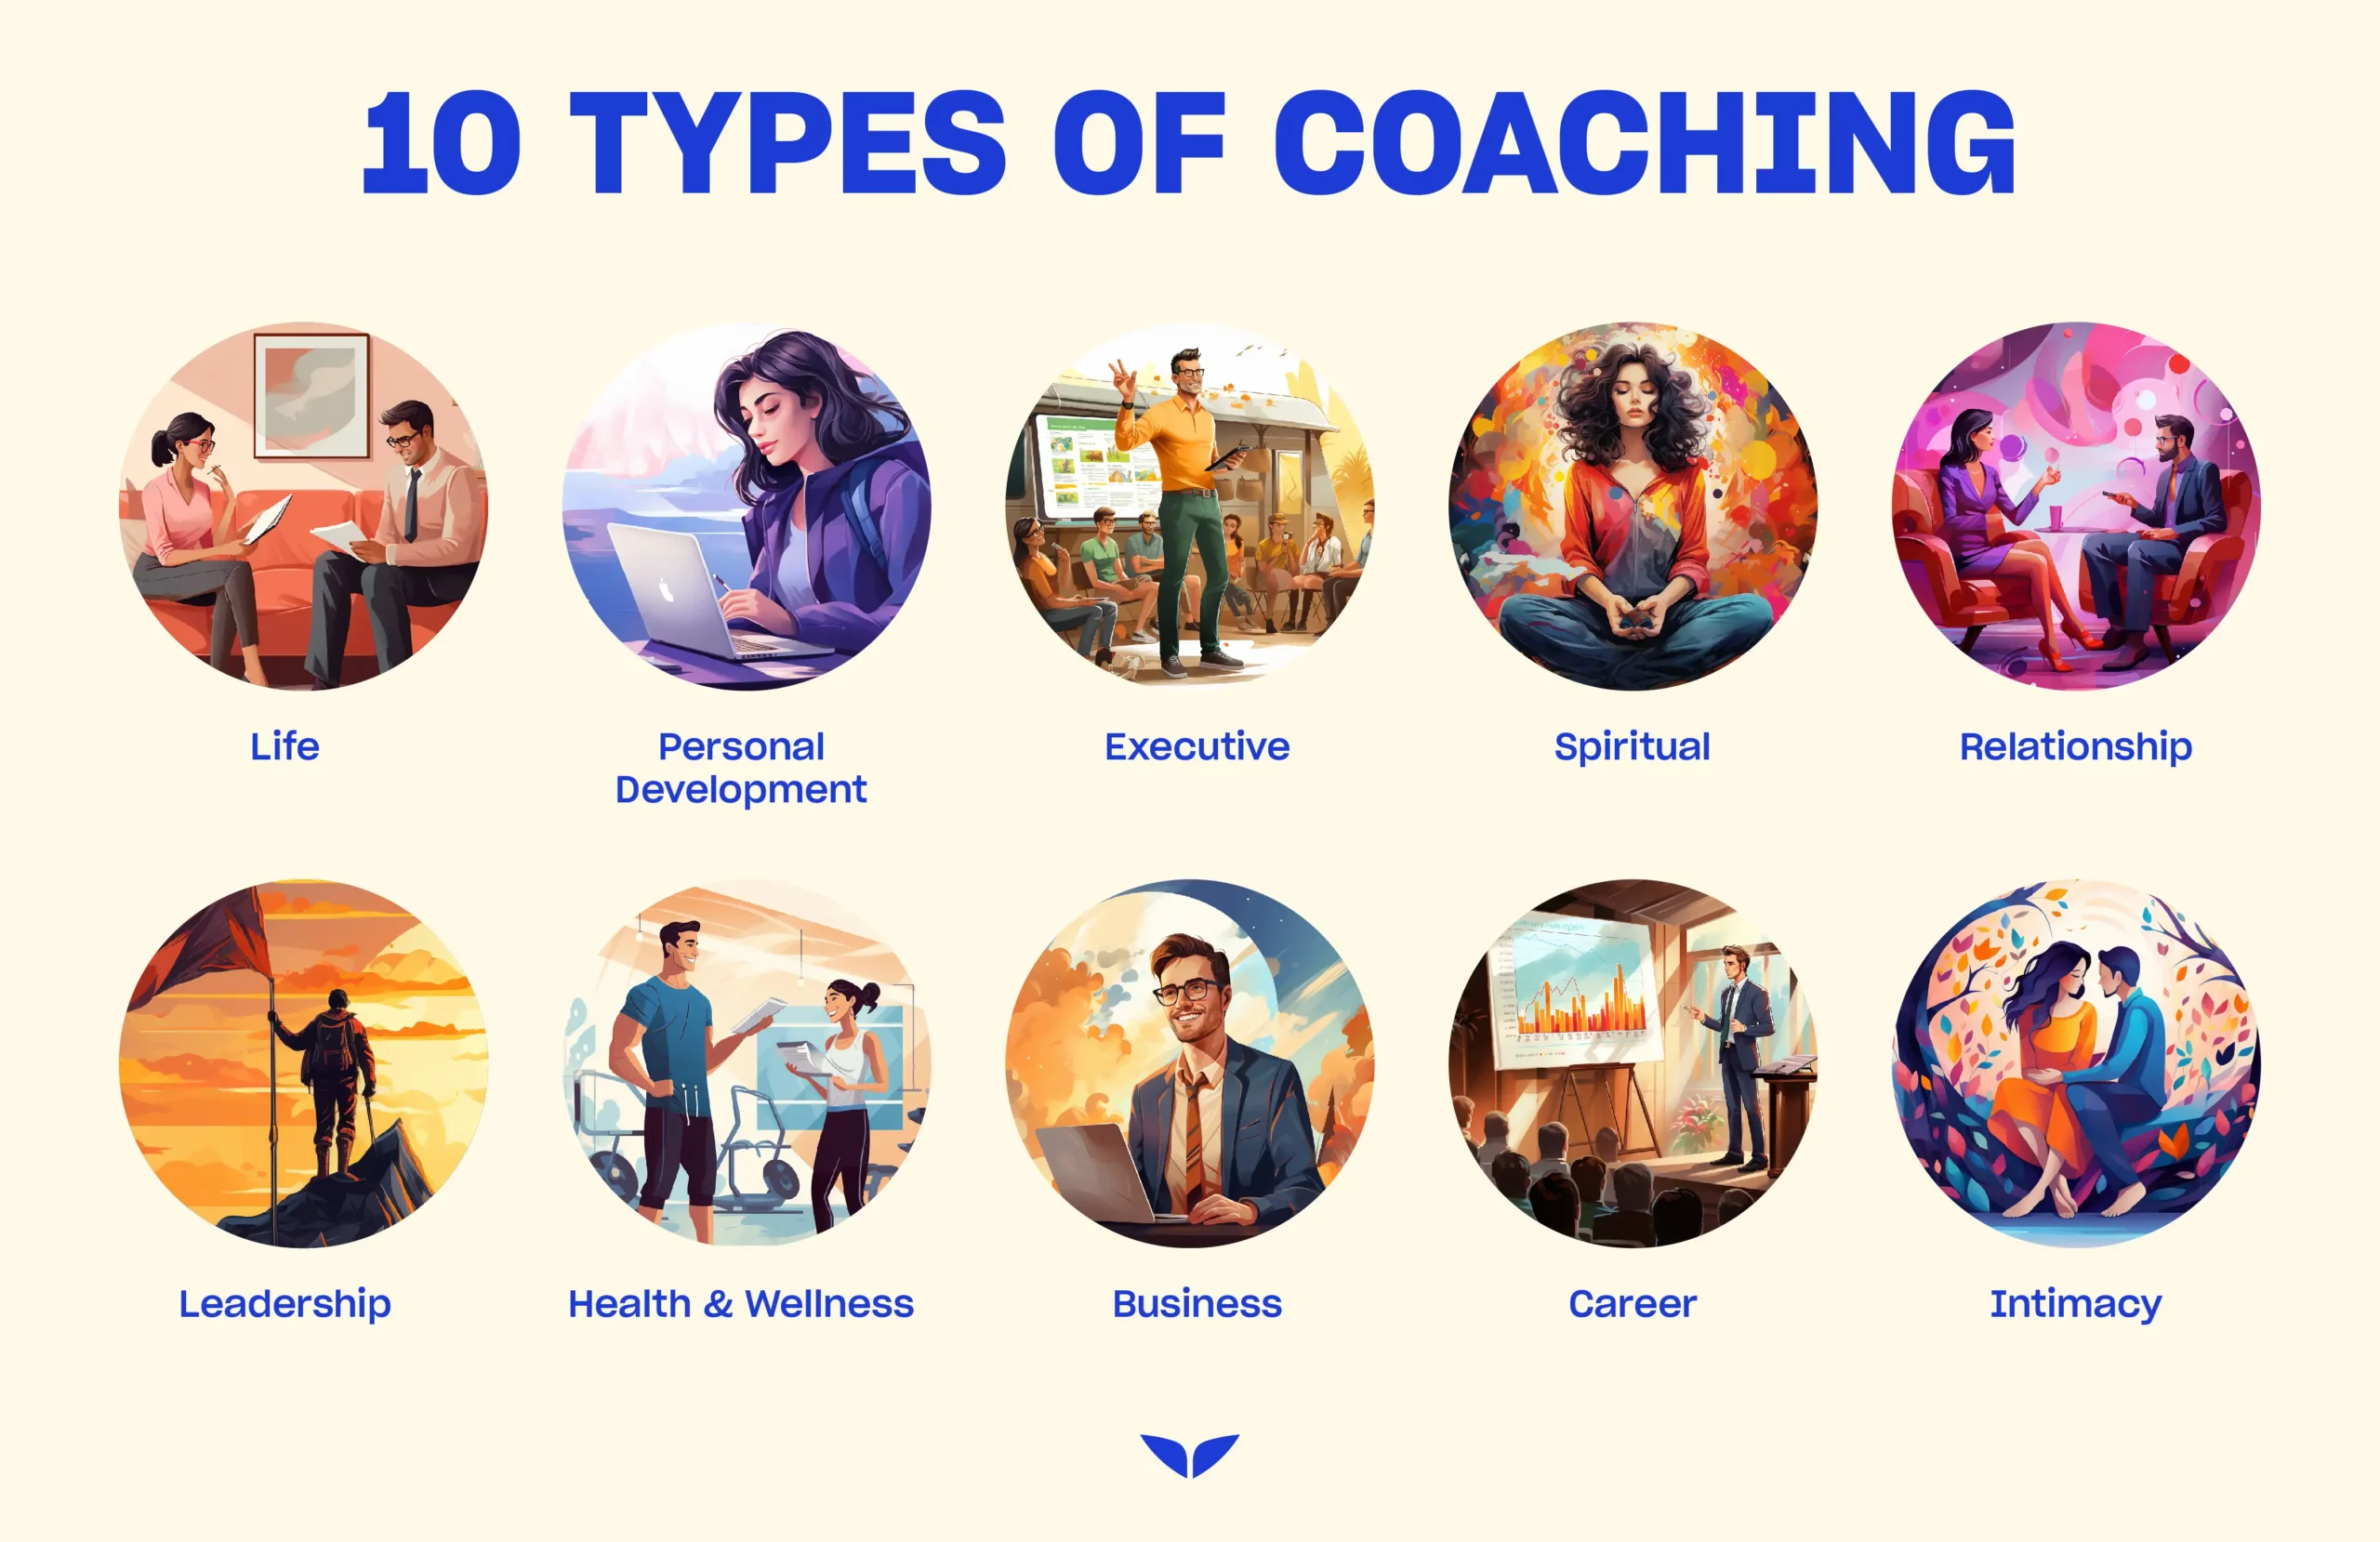 The 10 types of coaching